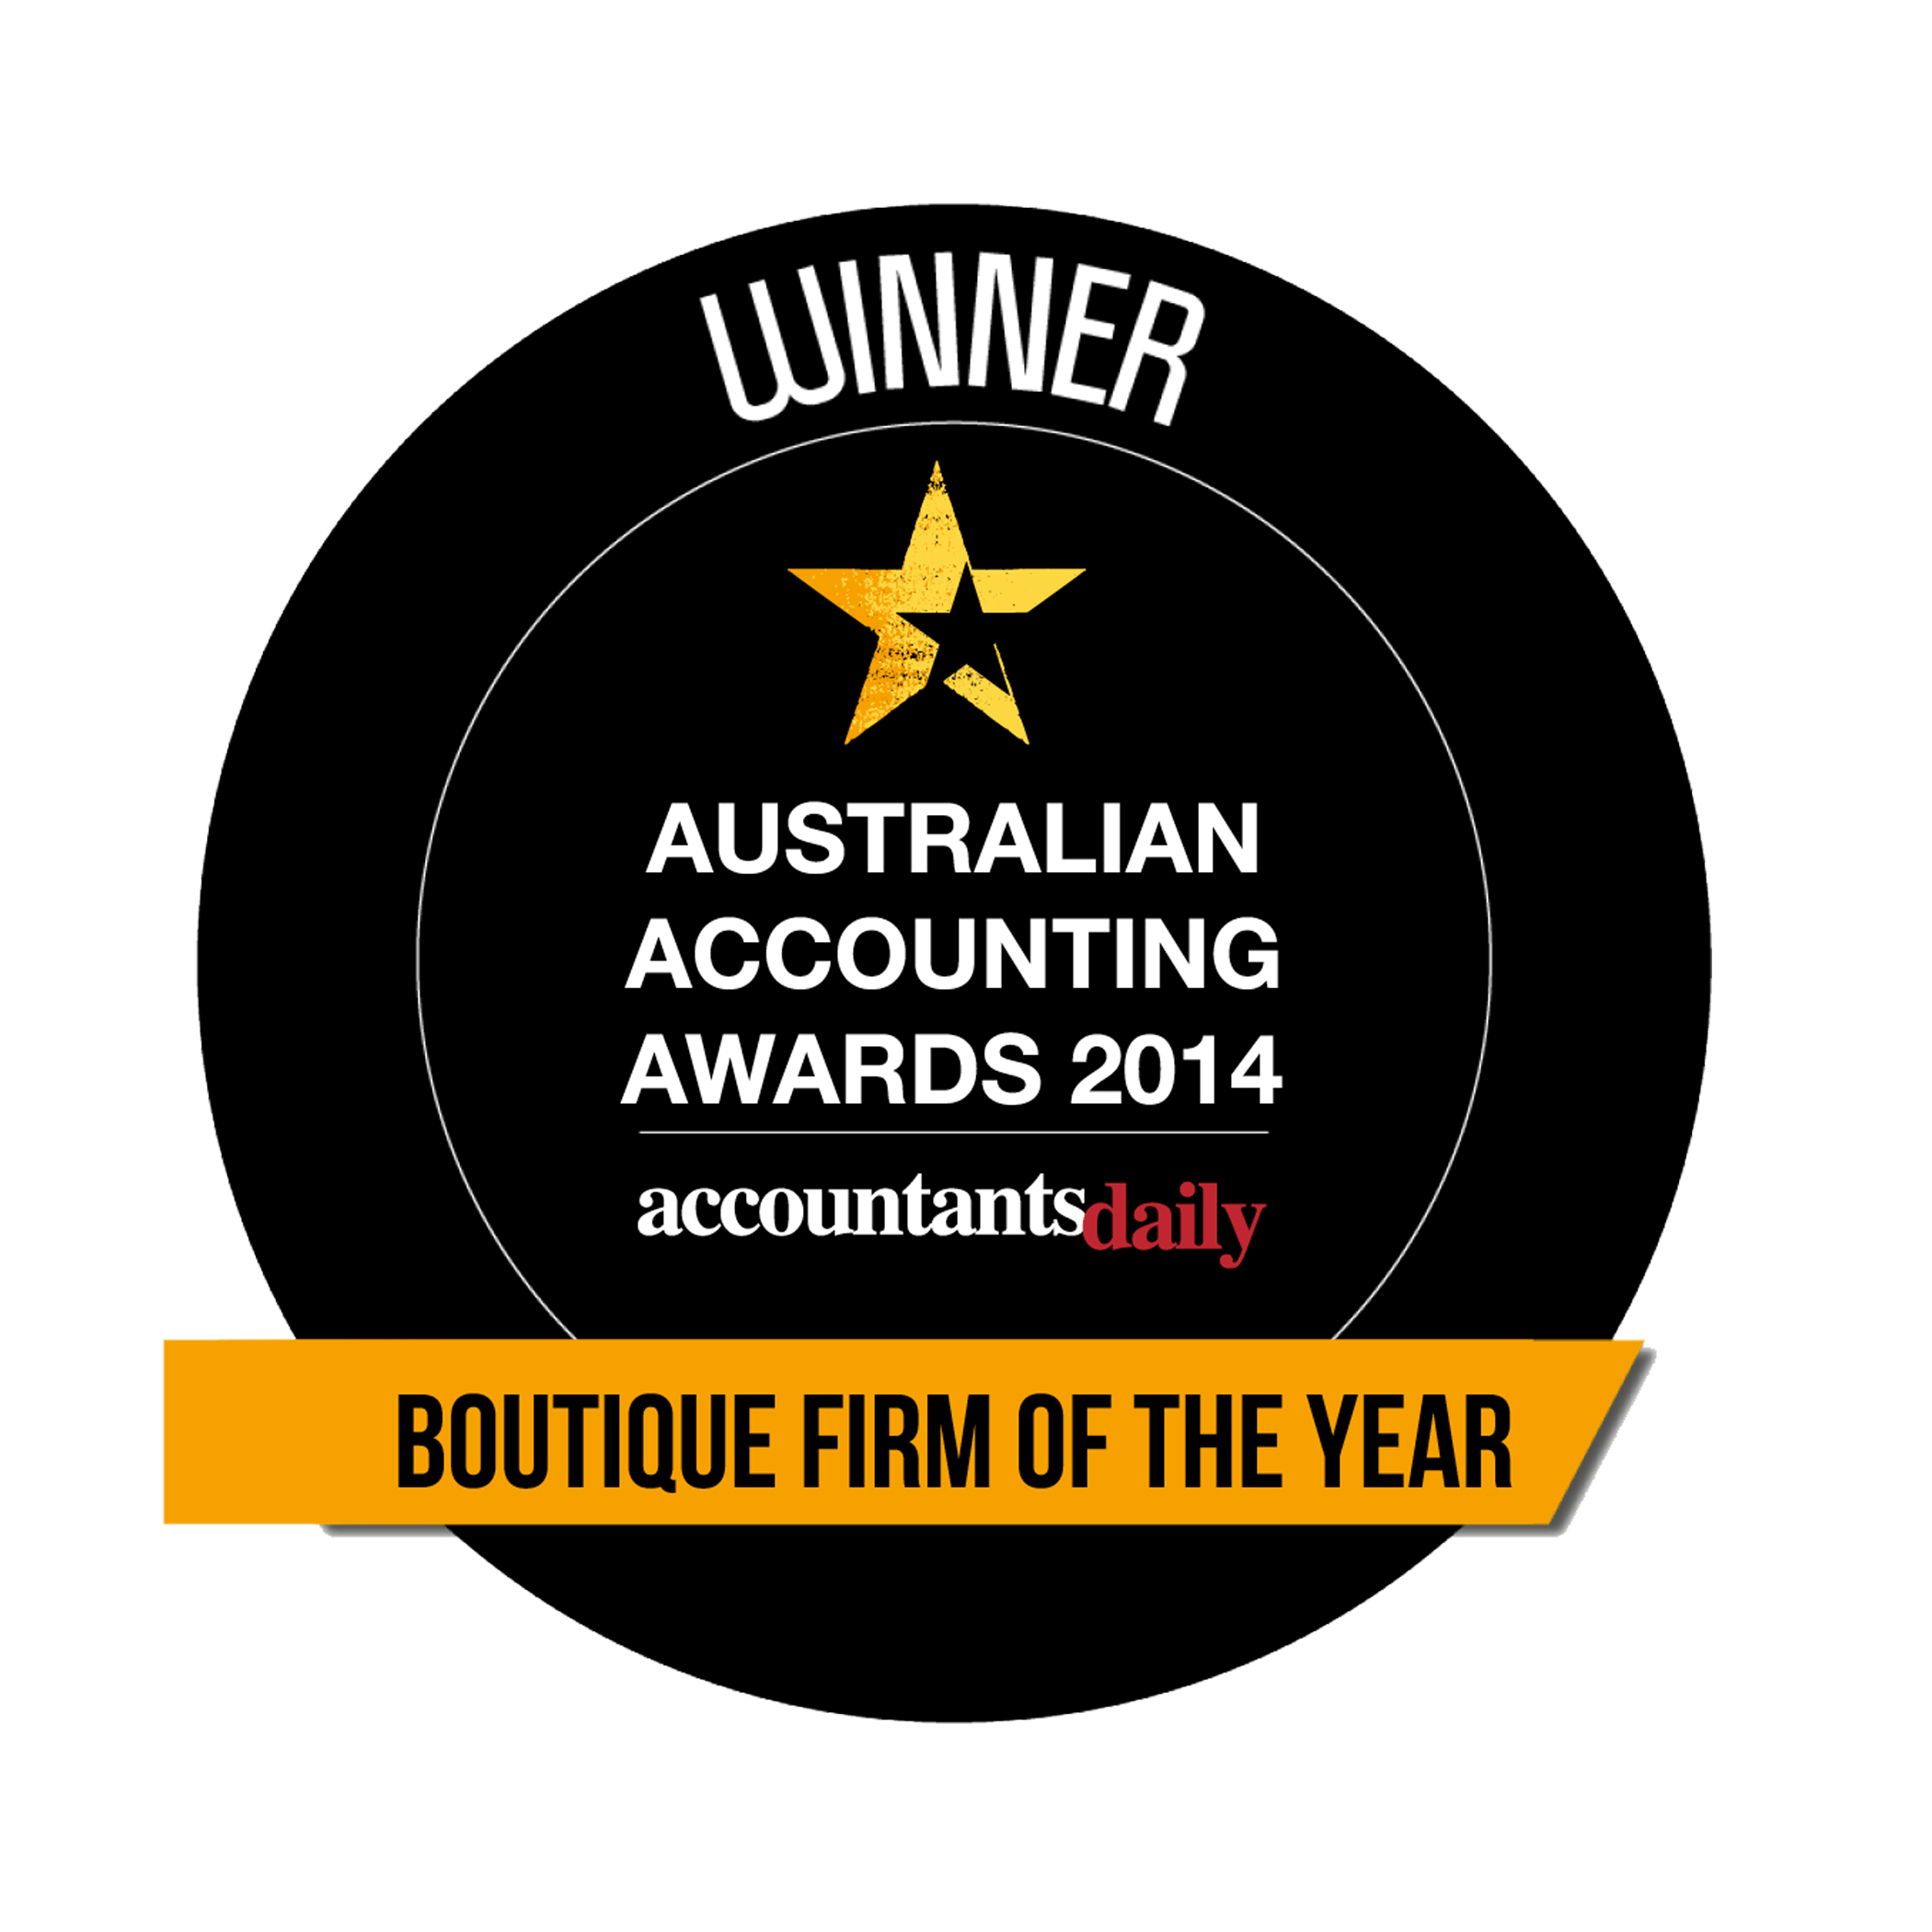 Aust Accounting Awards BOUTIQUE FIRM OF THE YEAR 2014